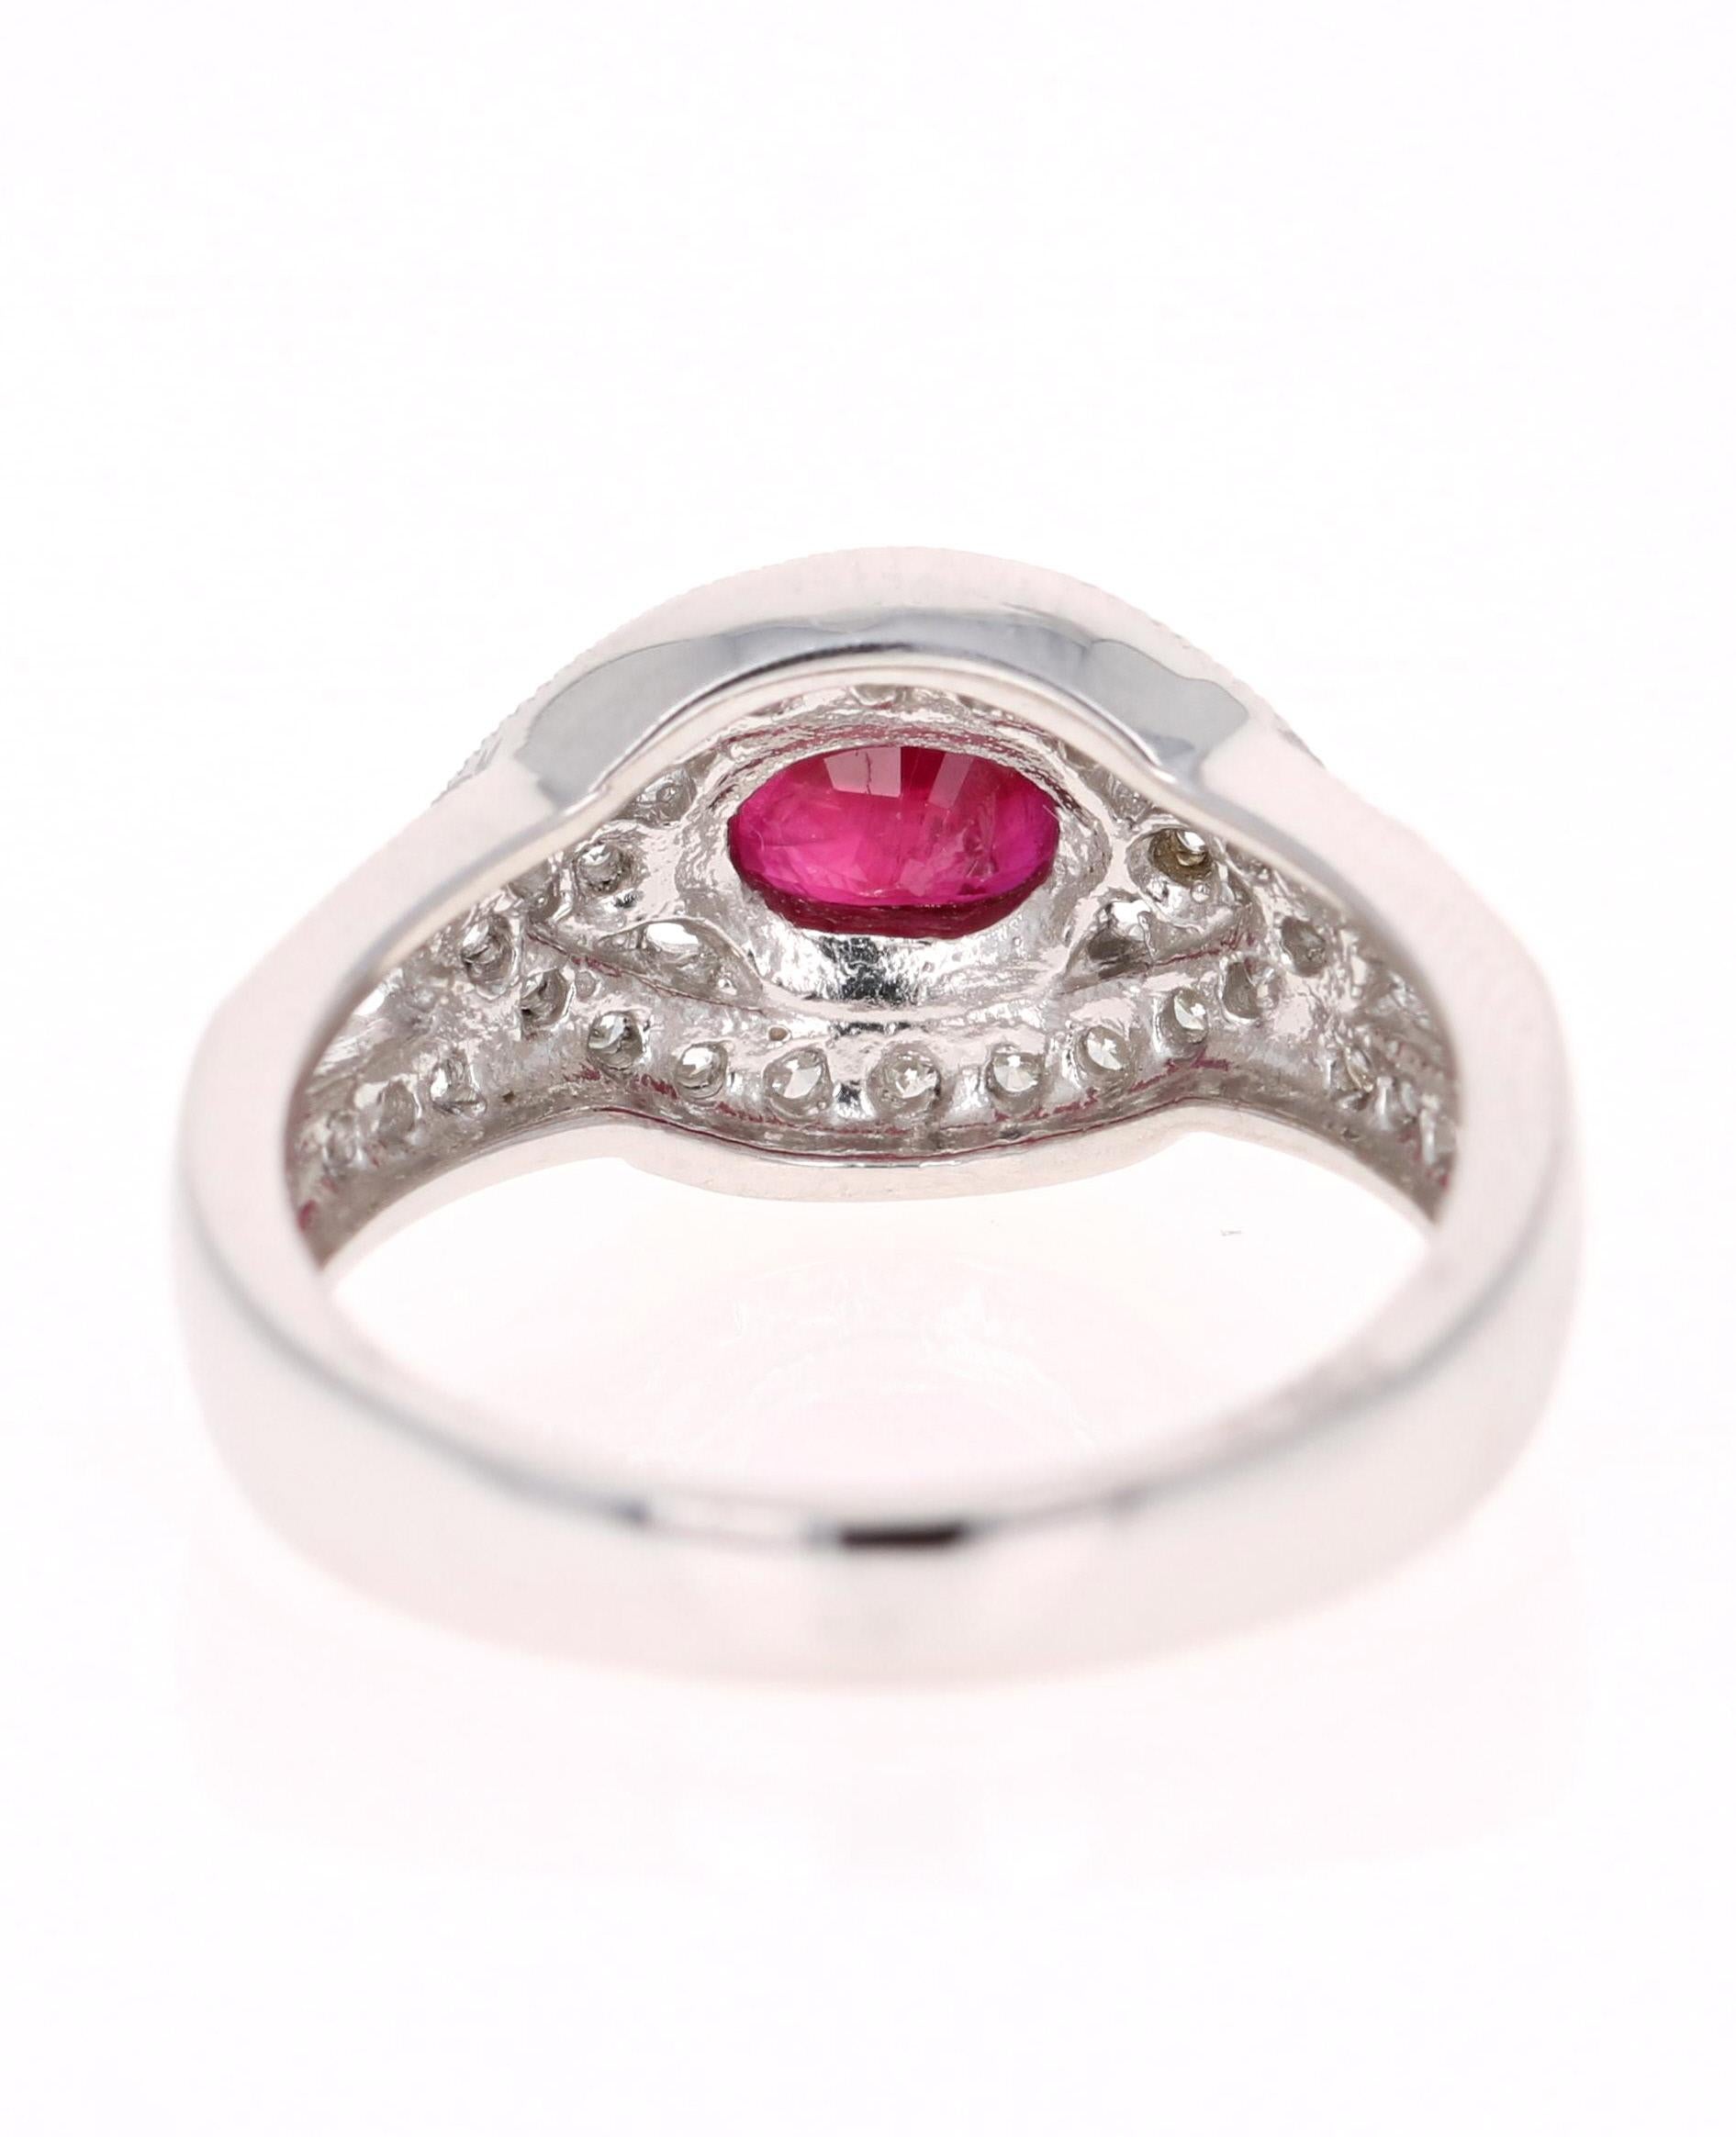 Contemporary 1.51 Carat Oval Cut Burmese Ruby Diamond 14 Karat White Gold Ring Cocktail For Sale